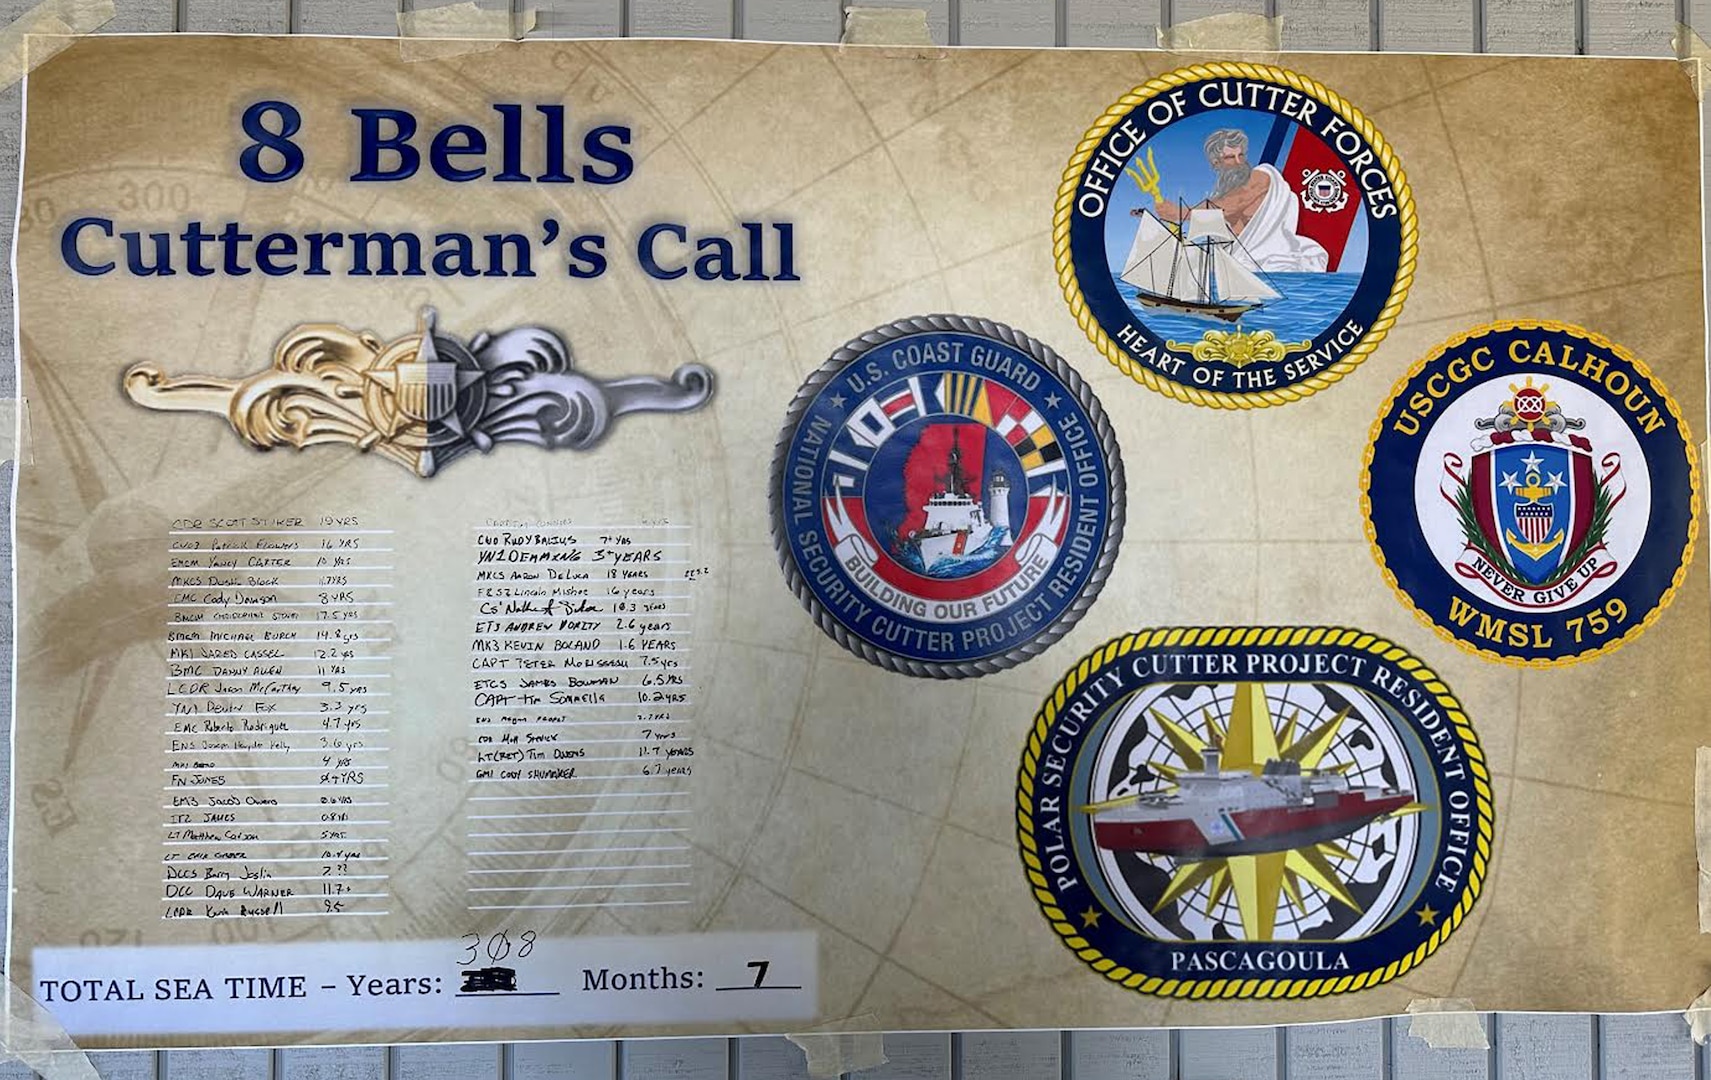 The Eight Bells Celebration honors traditions of sea service, nautical writings.